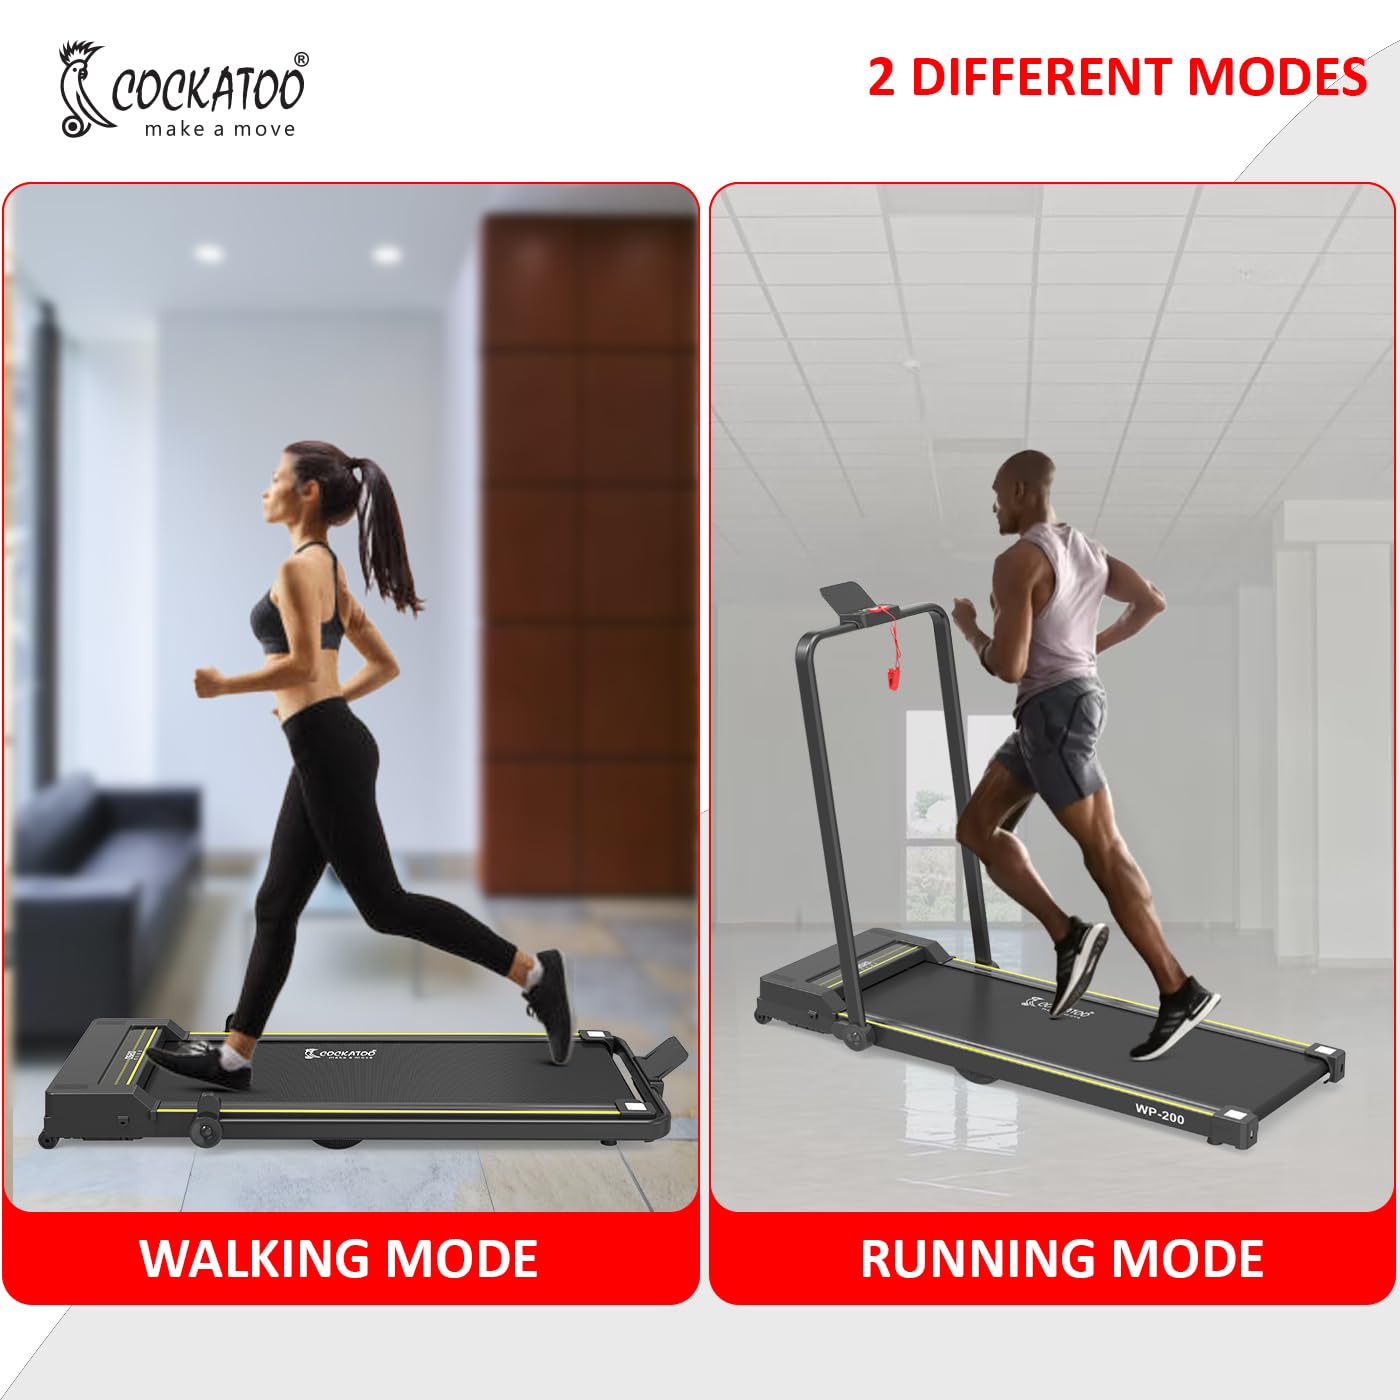 Cockatoo WP-200 1.5HP - 3HP Peak Motorized Treadmill, Walking Pad for Home, Foldable Treadmill, Max Speed- 8 Km/Hr, Max Weight 110 Kg(Free Installation Assistance, 1 Year Warranty)